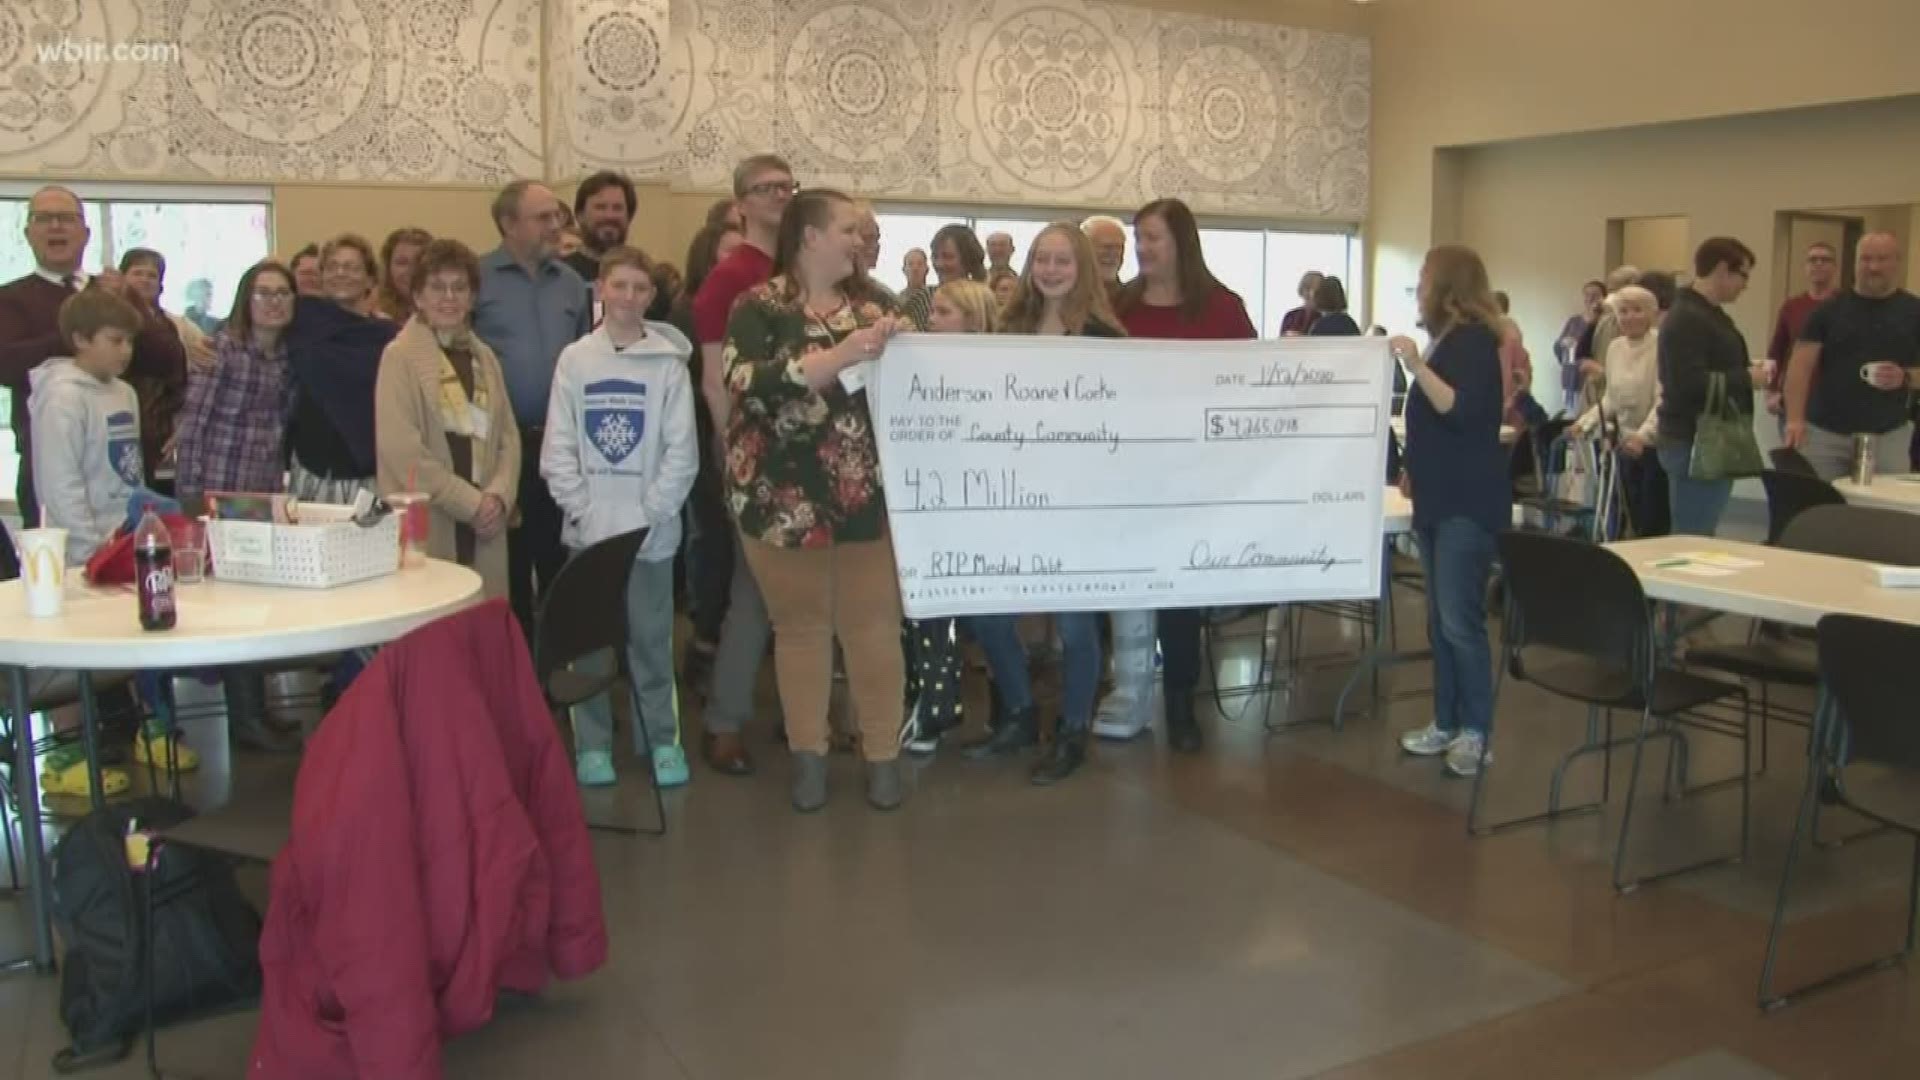 Oak Ridge Unitarian Universalist Church teamed up with RIP Medical Debt to help families in Anderson, Roane and Cocke counties erase medical debt.